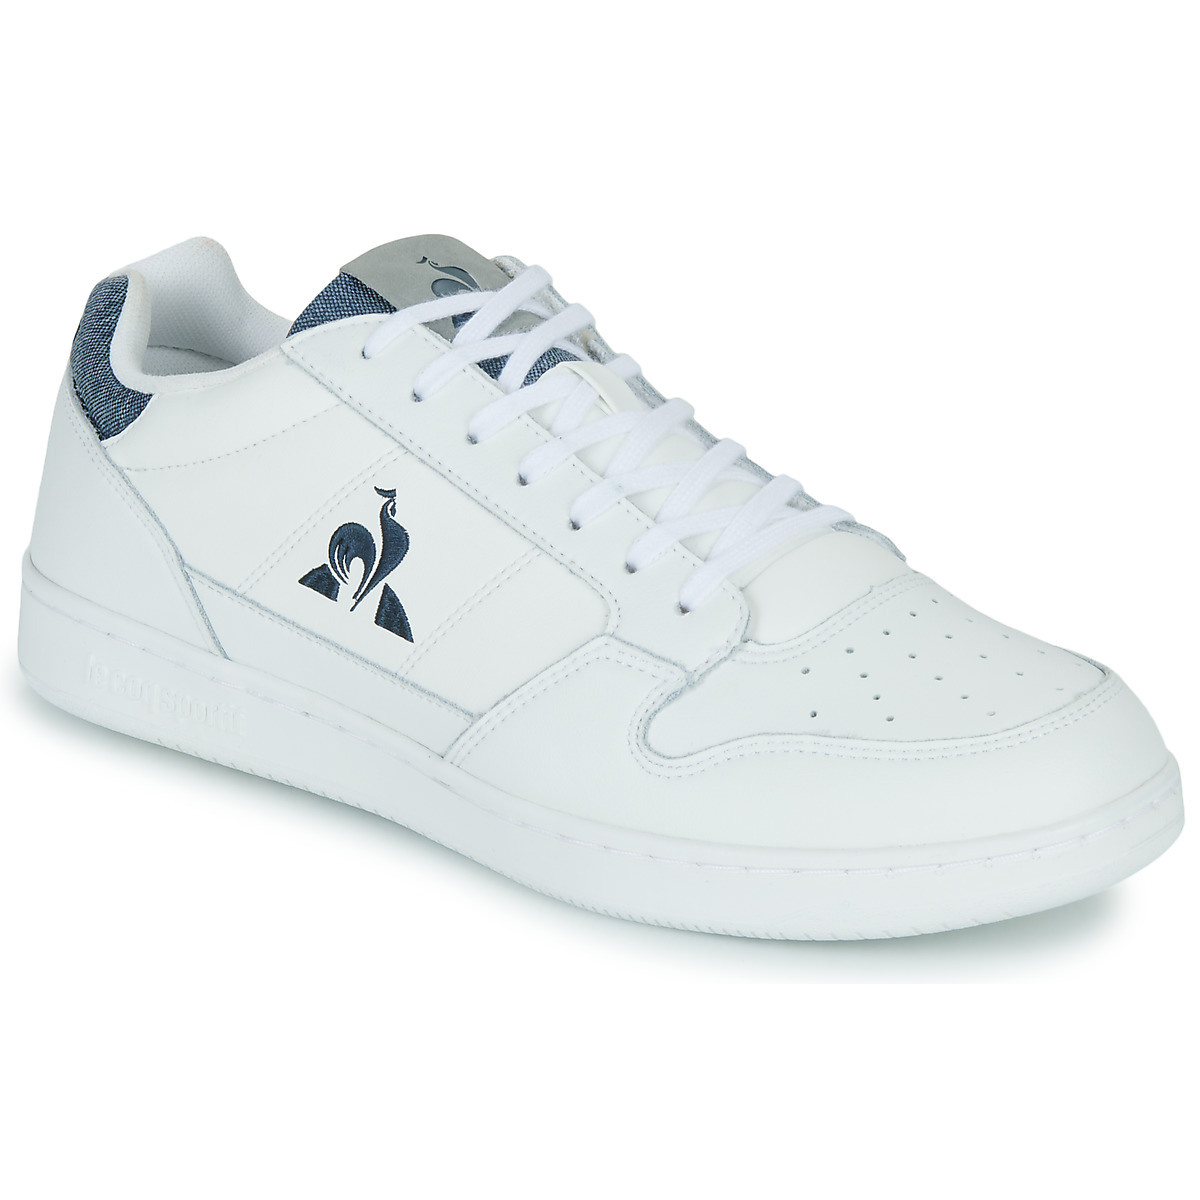 Le Coq Sportif Breakpoint Craft White